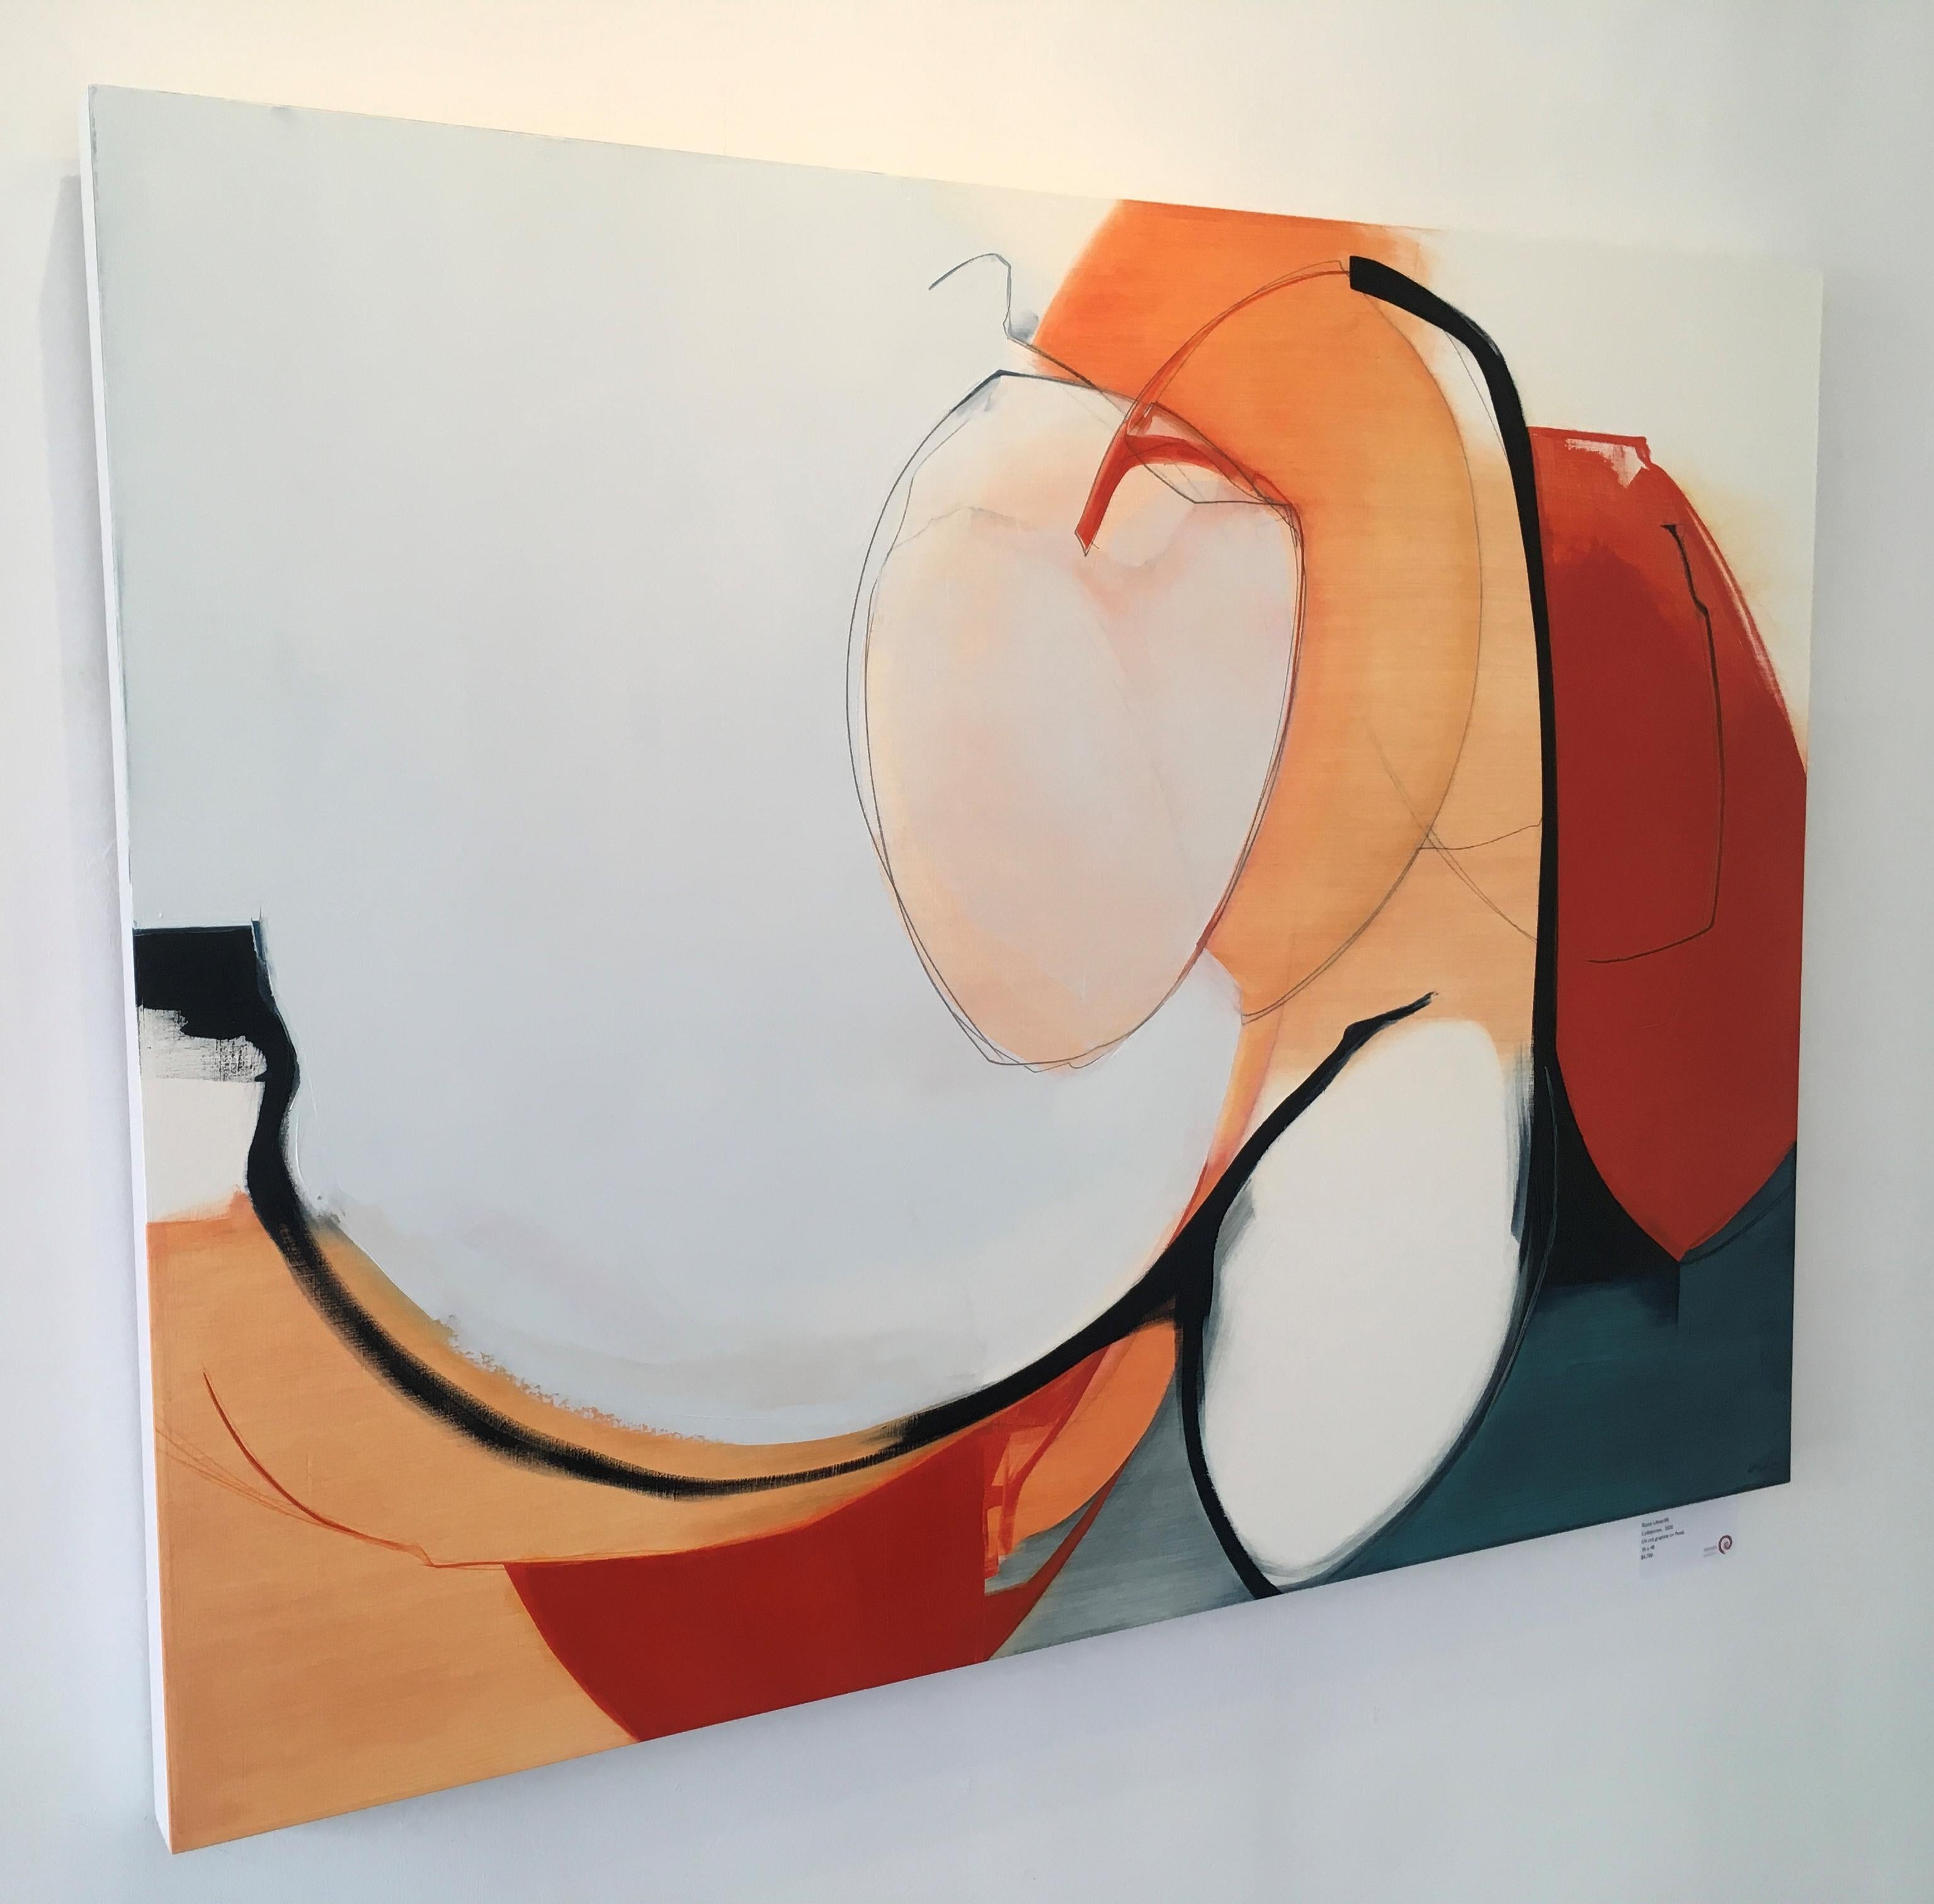 Collaborate by Rose Umerlik is an abstract painting, Oil and Graphite on wood panel, 36 x 48.

Rose Umerlik extracts the intangible emotional moments that live in our collective human psyche and interprets them abstractly through form, line and